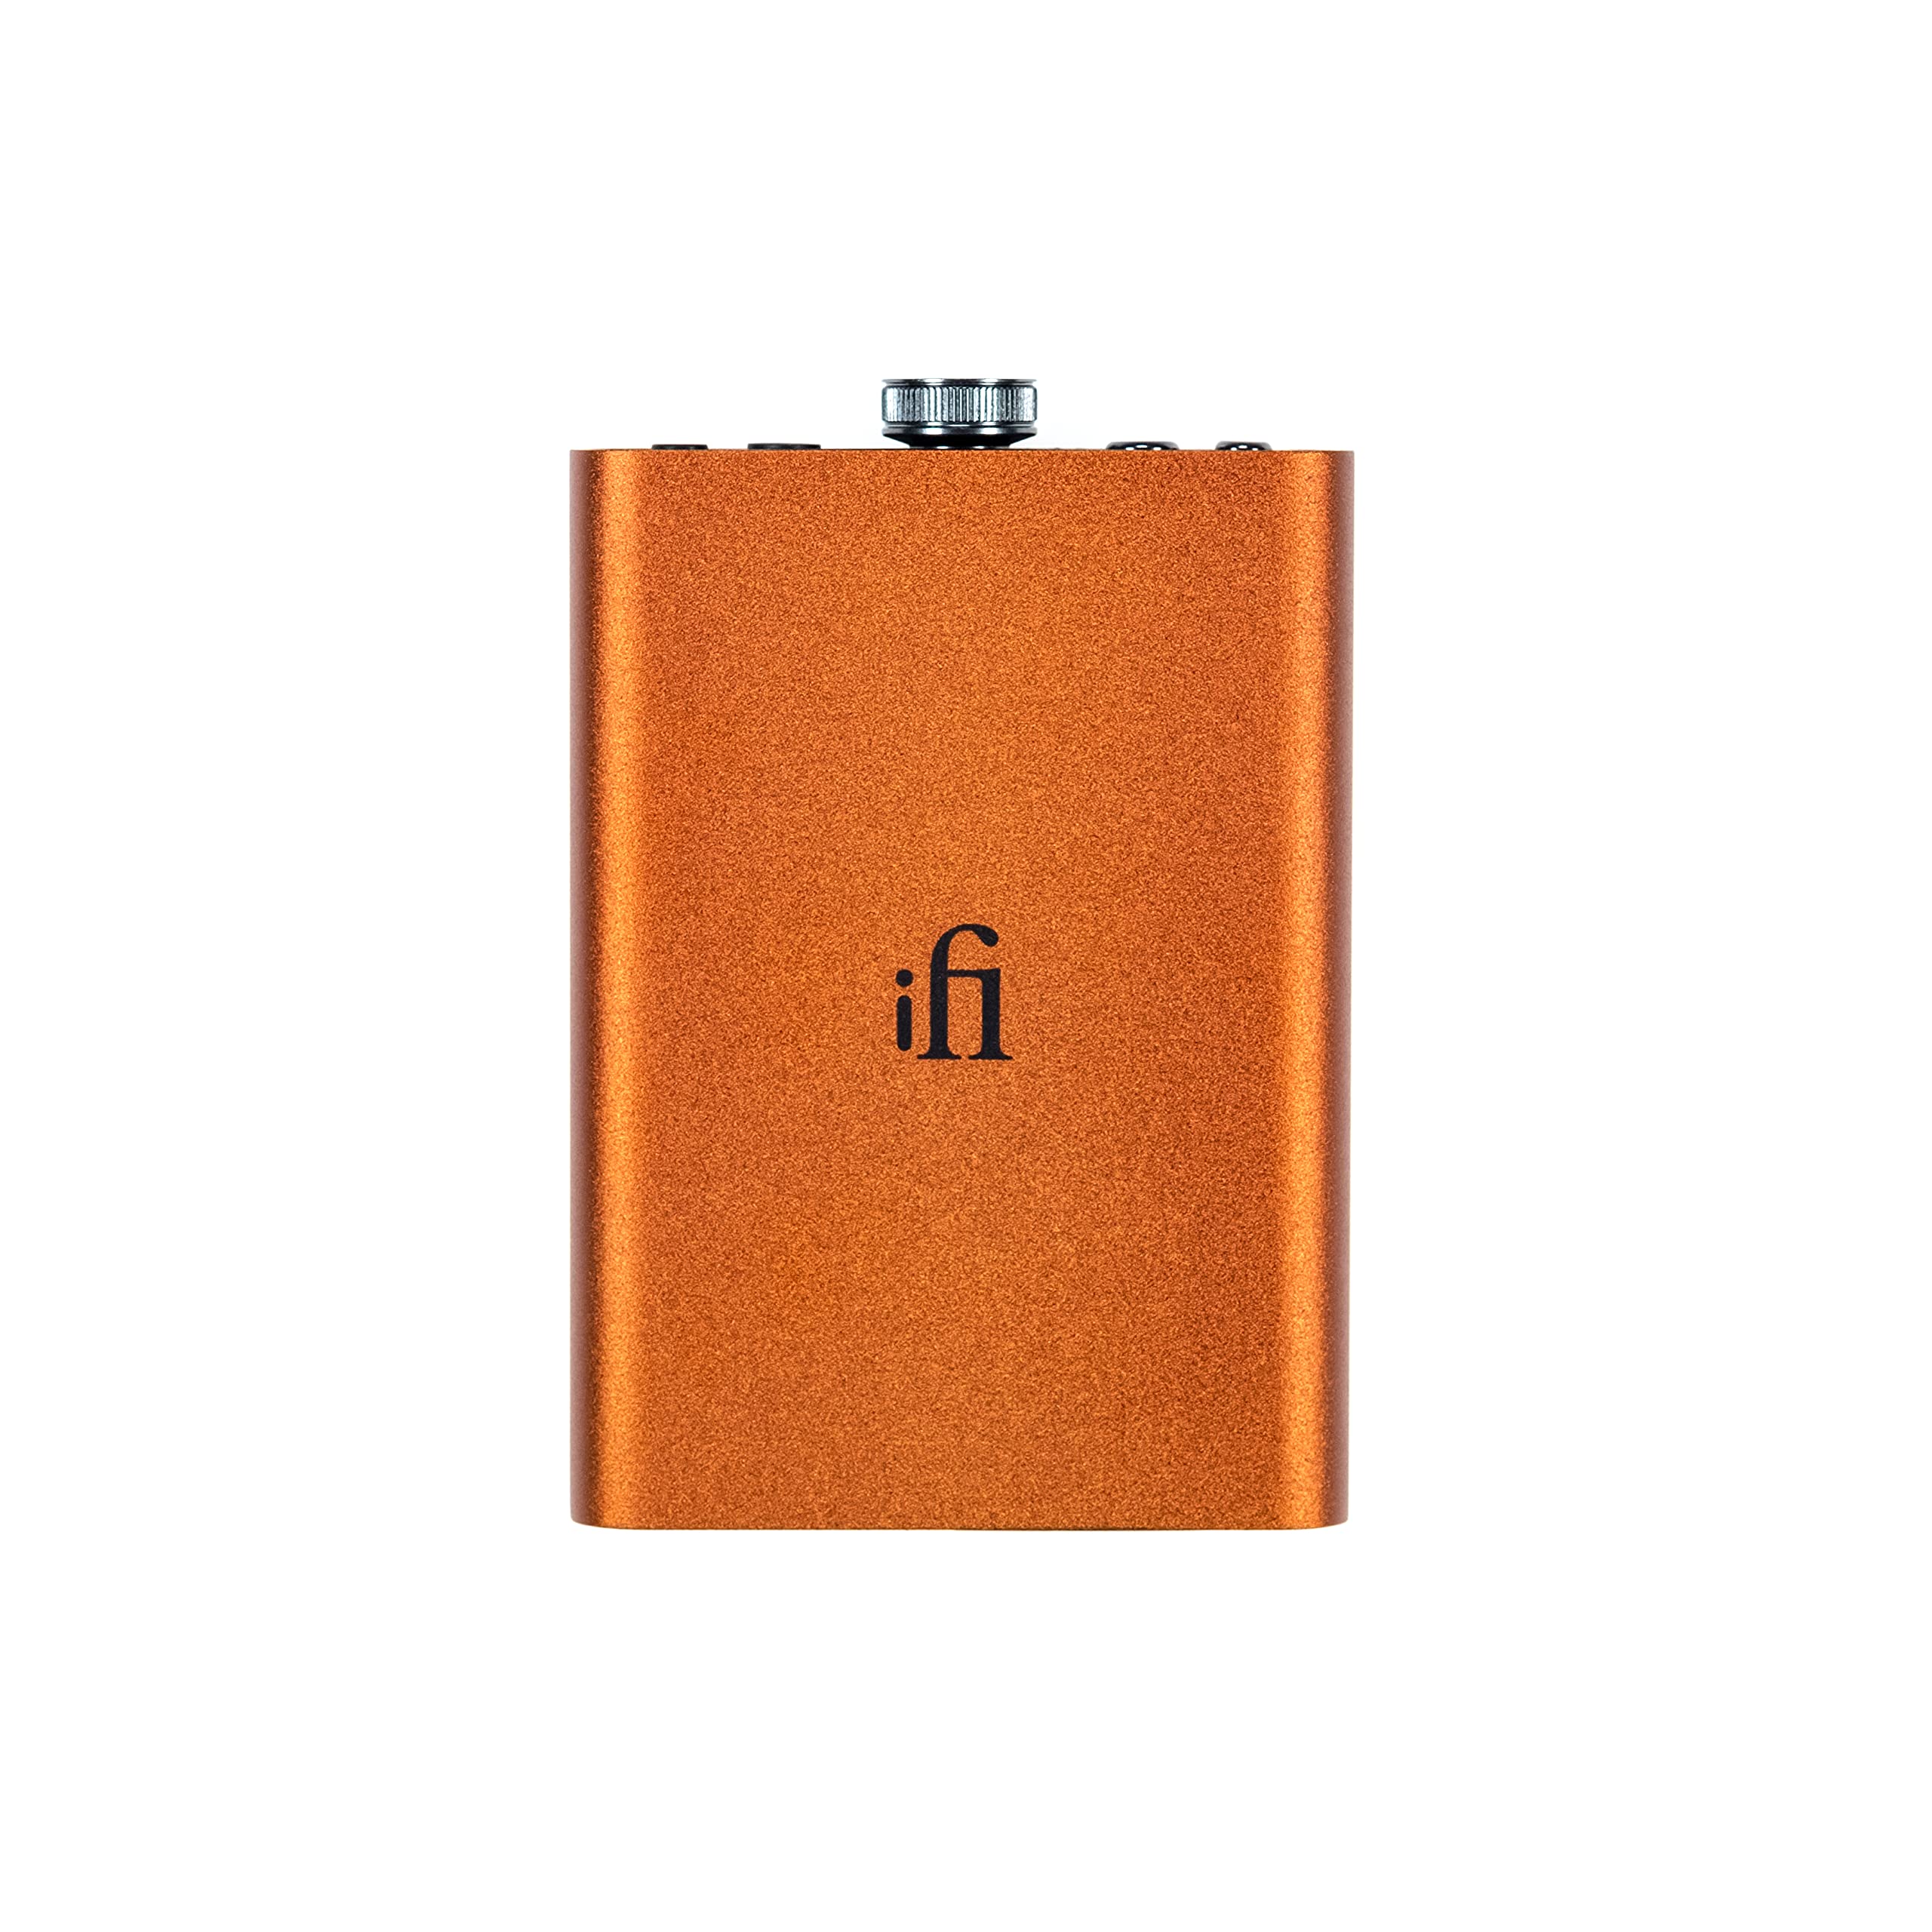 iFi Hip-dac2 - Portable Balanced DAC Headphone Amplifier for Android, iPhone with USB Input Only/Outputs: 3.5mm Unbalanced / 4.4mm Balanced – MQA Decoder